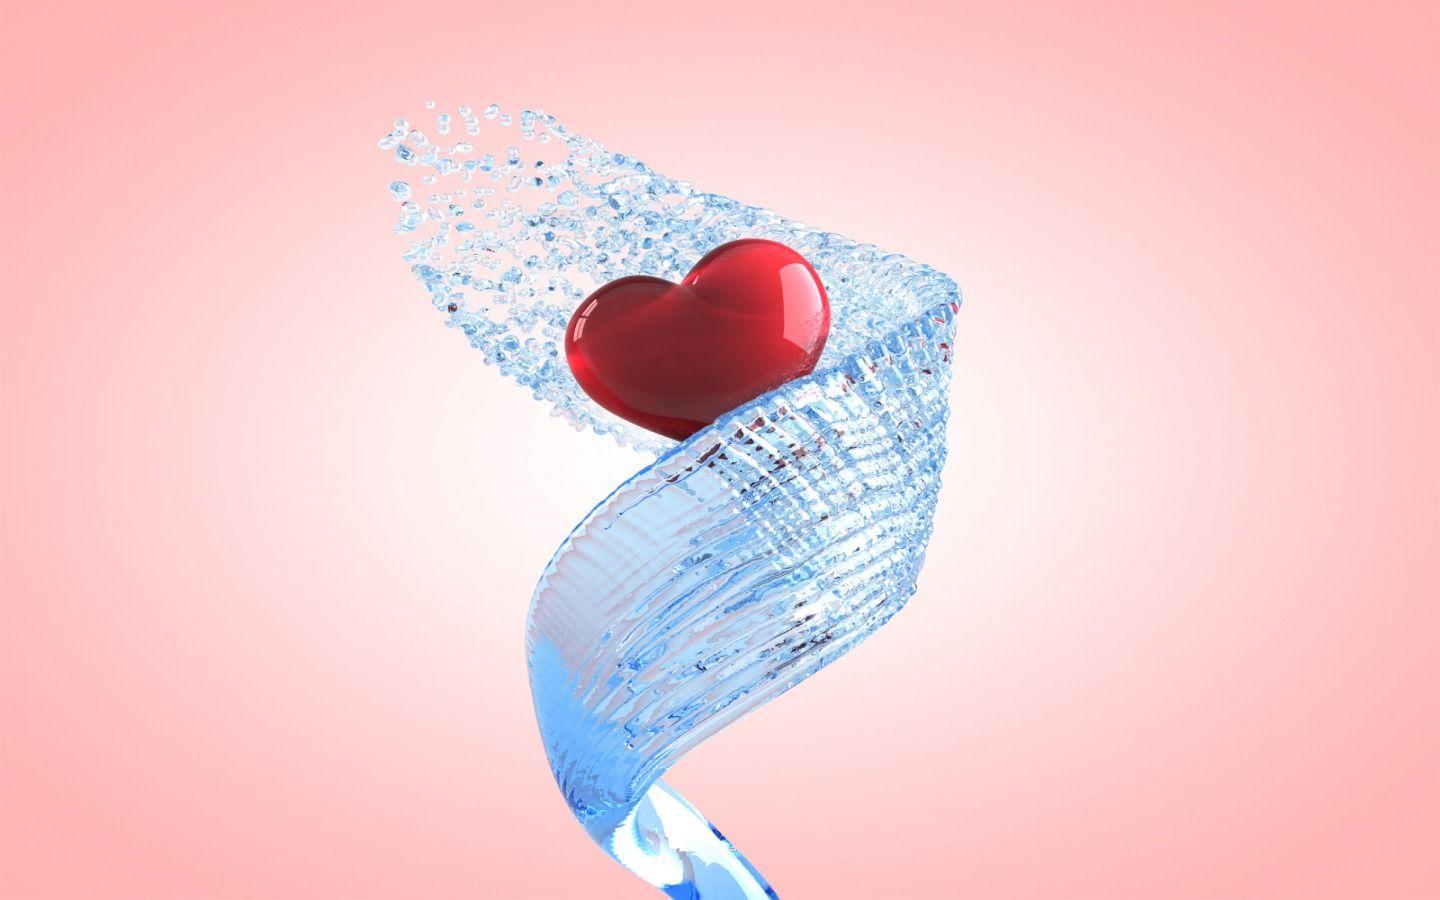 Heart Wallpaper Abstract 3D Wallpaper in jpg format for free download